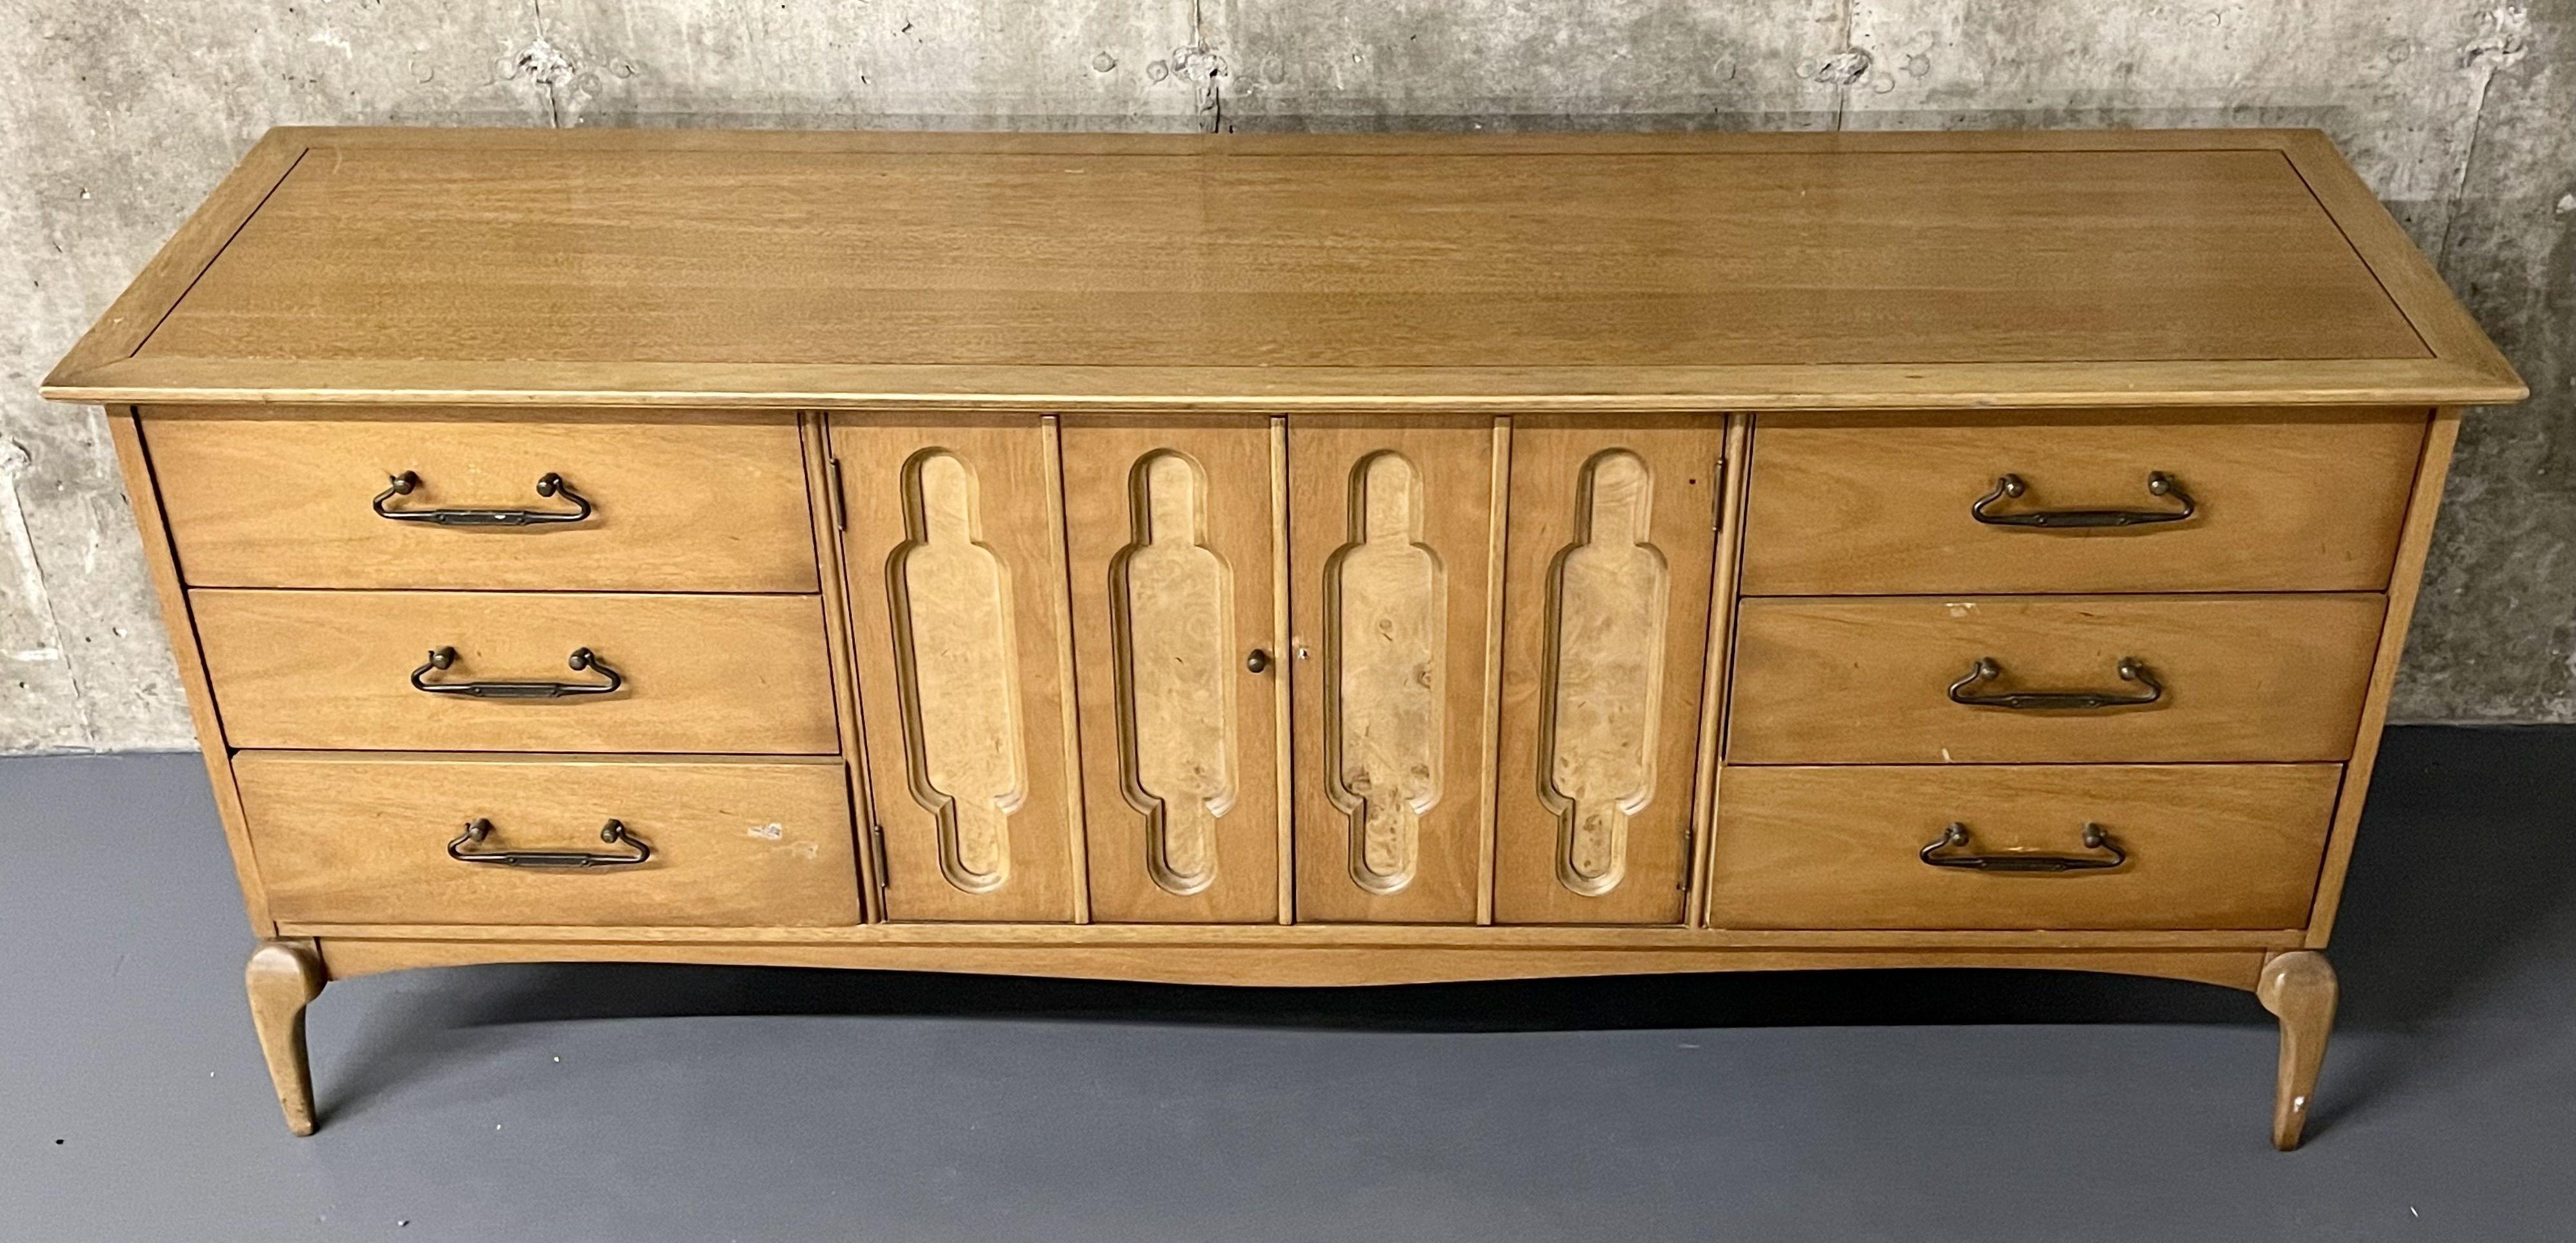 American Mid-Century Modern Dresser, Sideboard by United Furniture Company